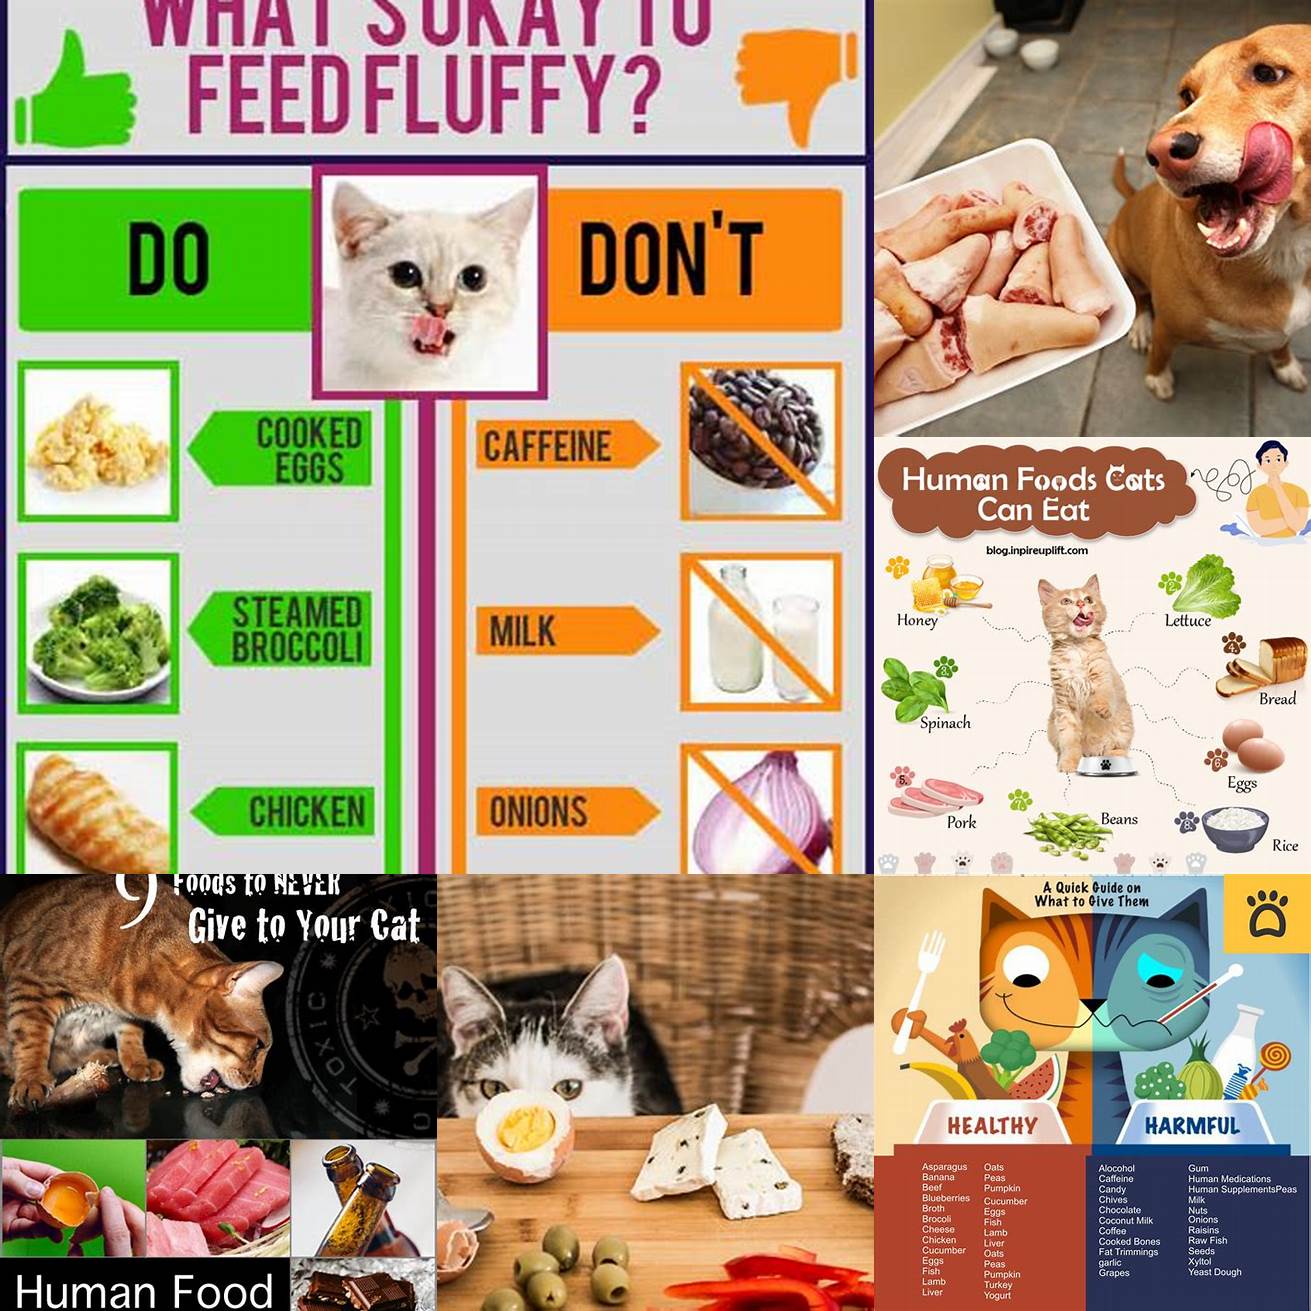 Do not rely on human food as a substitute for dog food